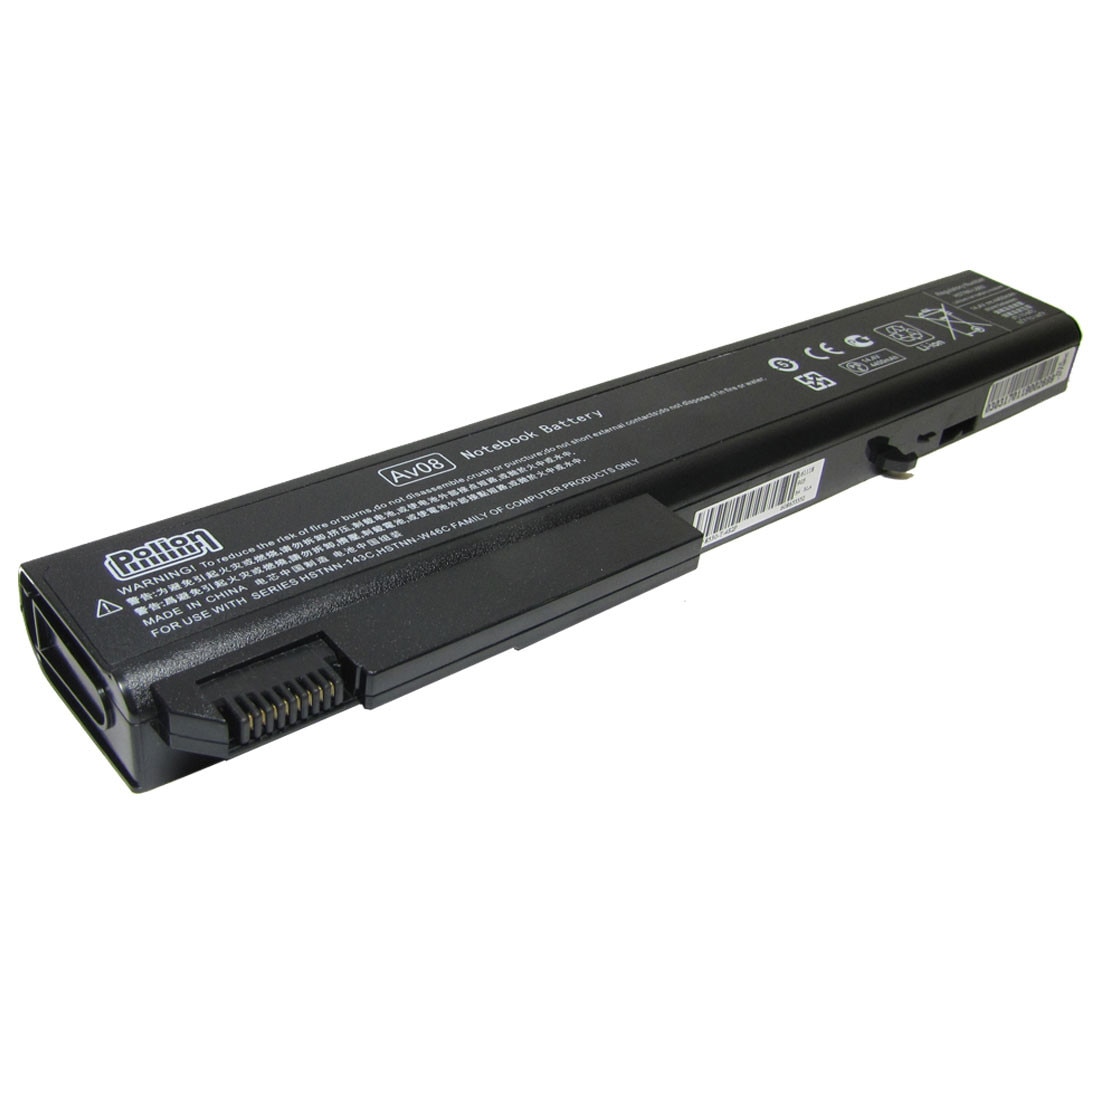 the purpose march subtraction Baterie laptop HP EliteBook 8500 8700 8530p 8530w 8540p 8540w 8730p 8730w  8740w - eMAG.ro